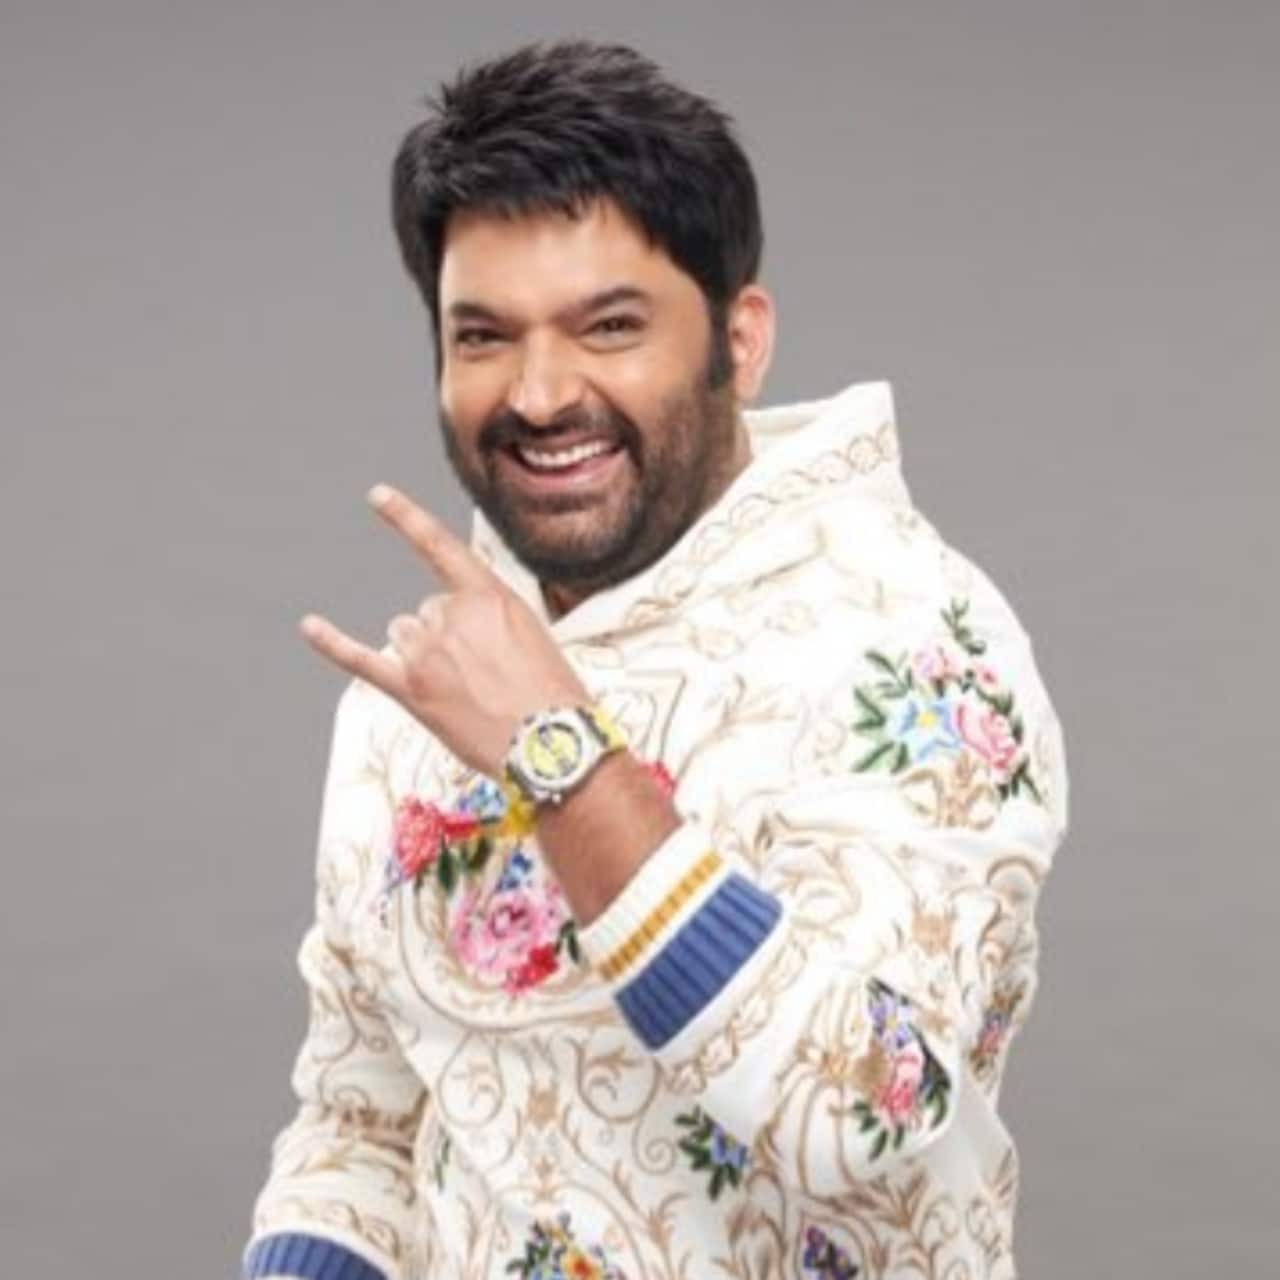 Kapil Sharma called Sidhu Moose Wala a great artist and expressed deep shock over his death